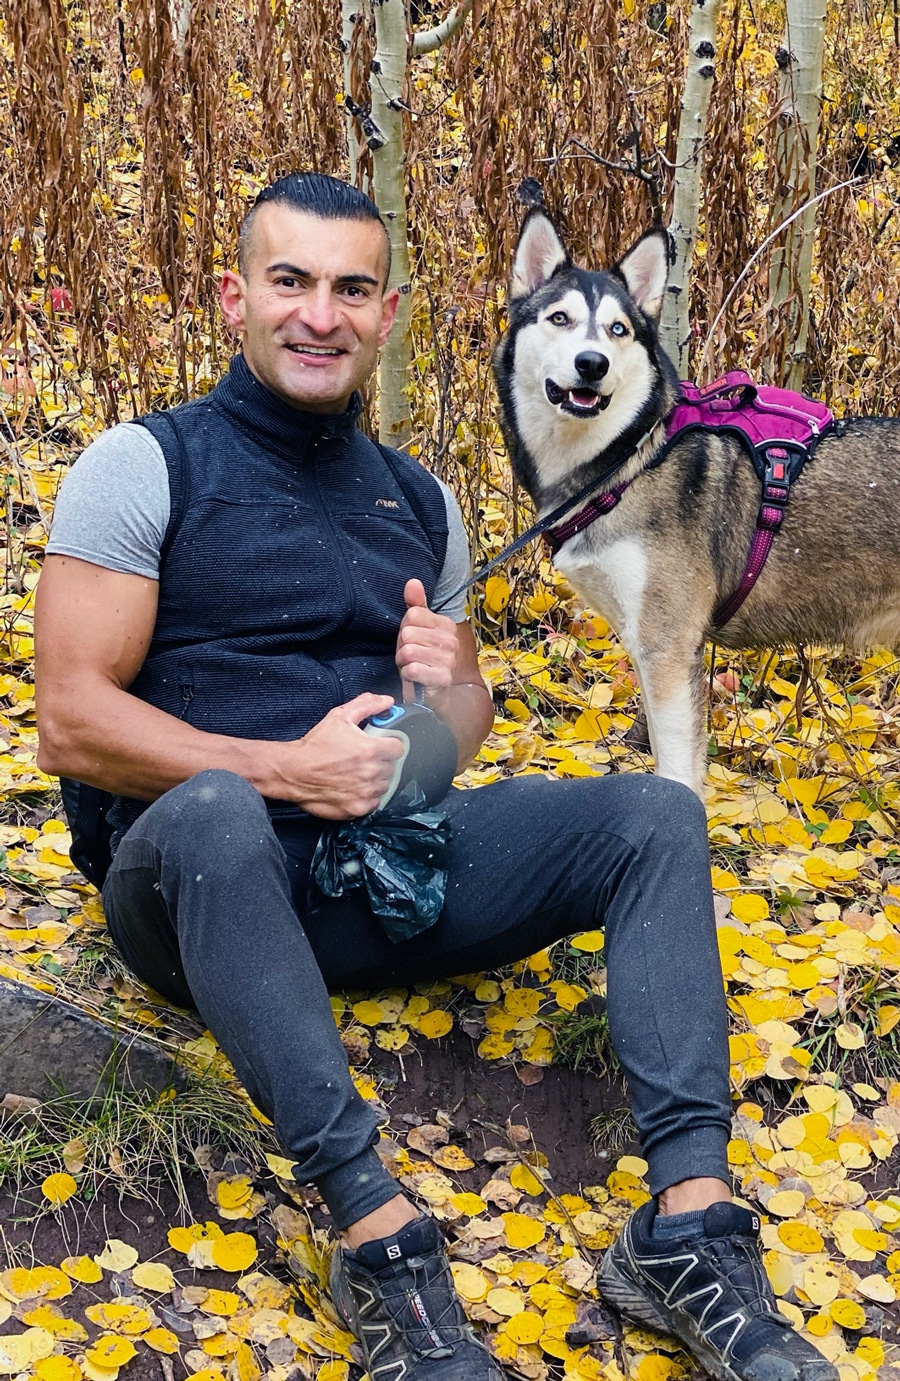 Dr. Cassio Castro with his husky dog in a fall forest